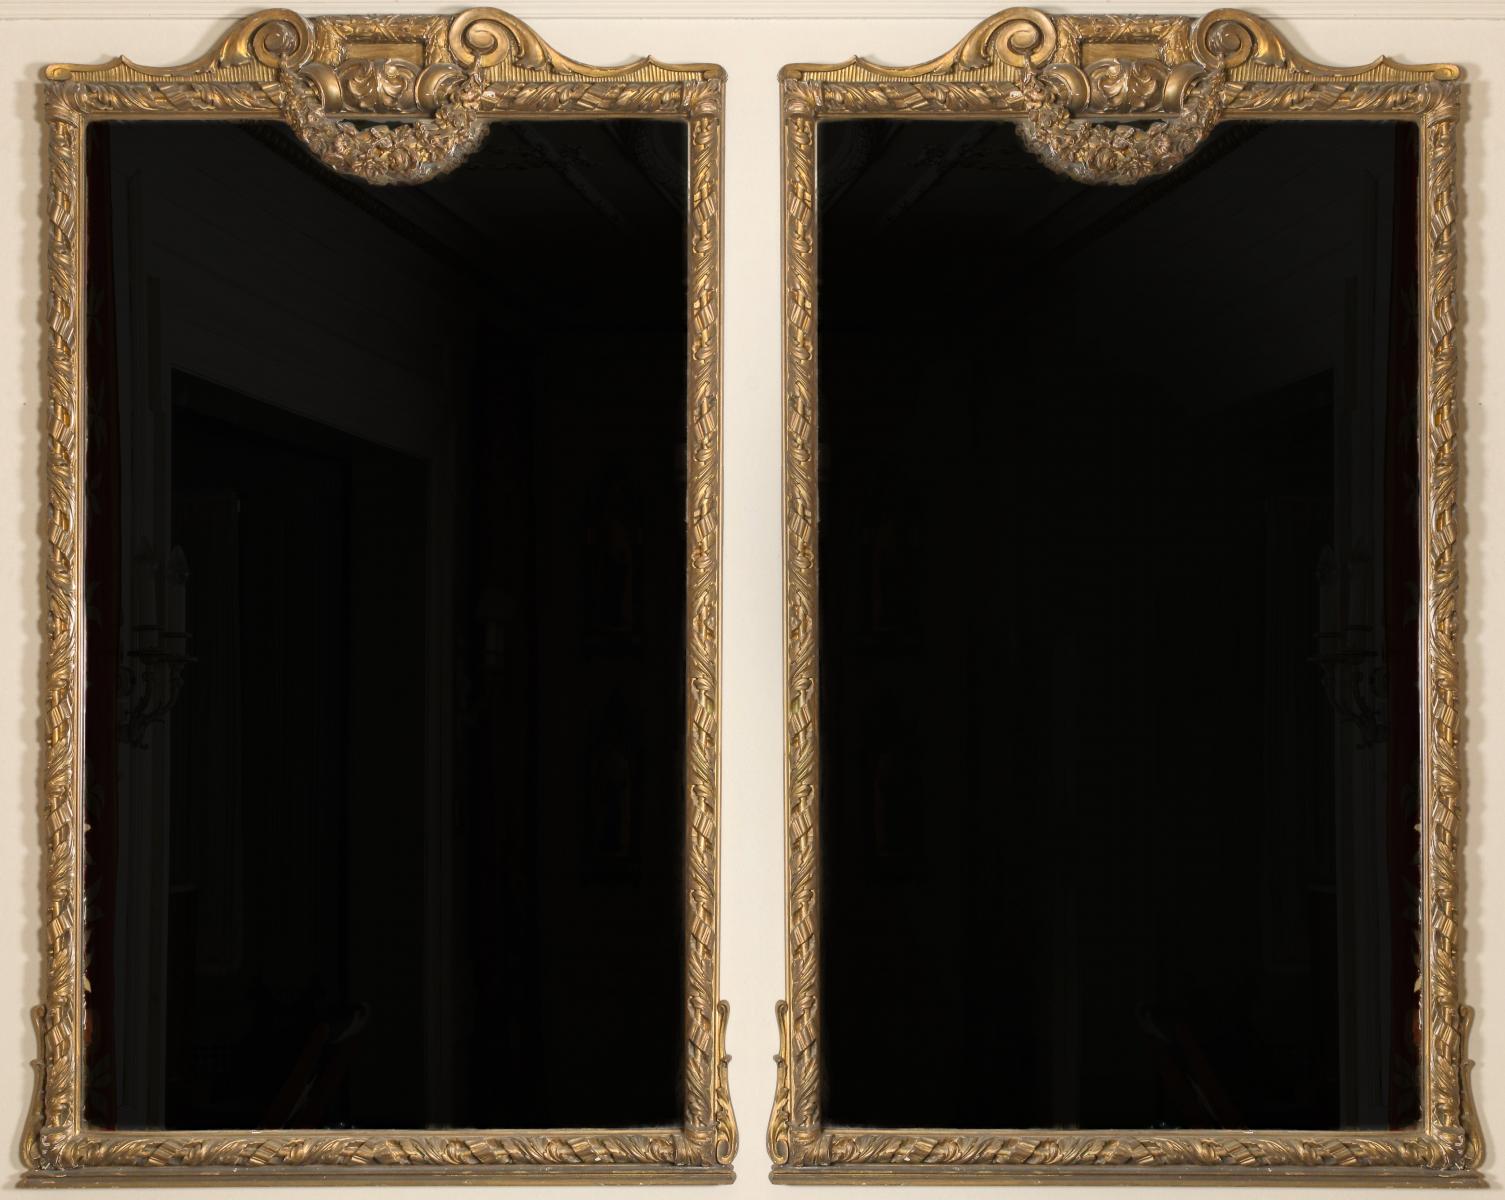 A MATCHED PAIR OF LARGE 19TH CENTURY FRENCH MIRRORS